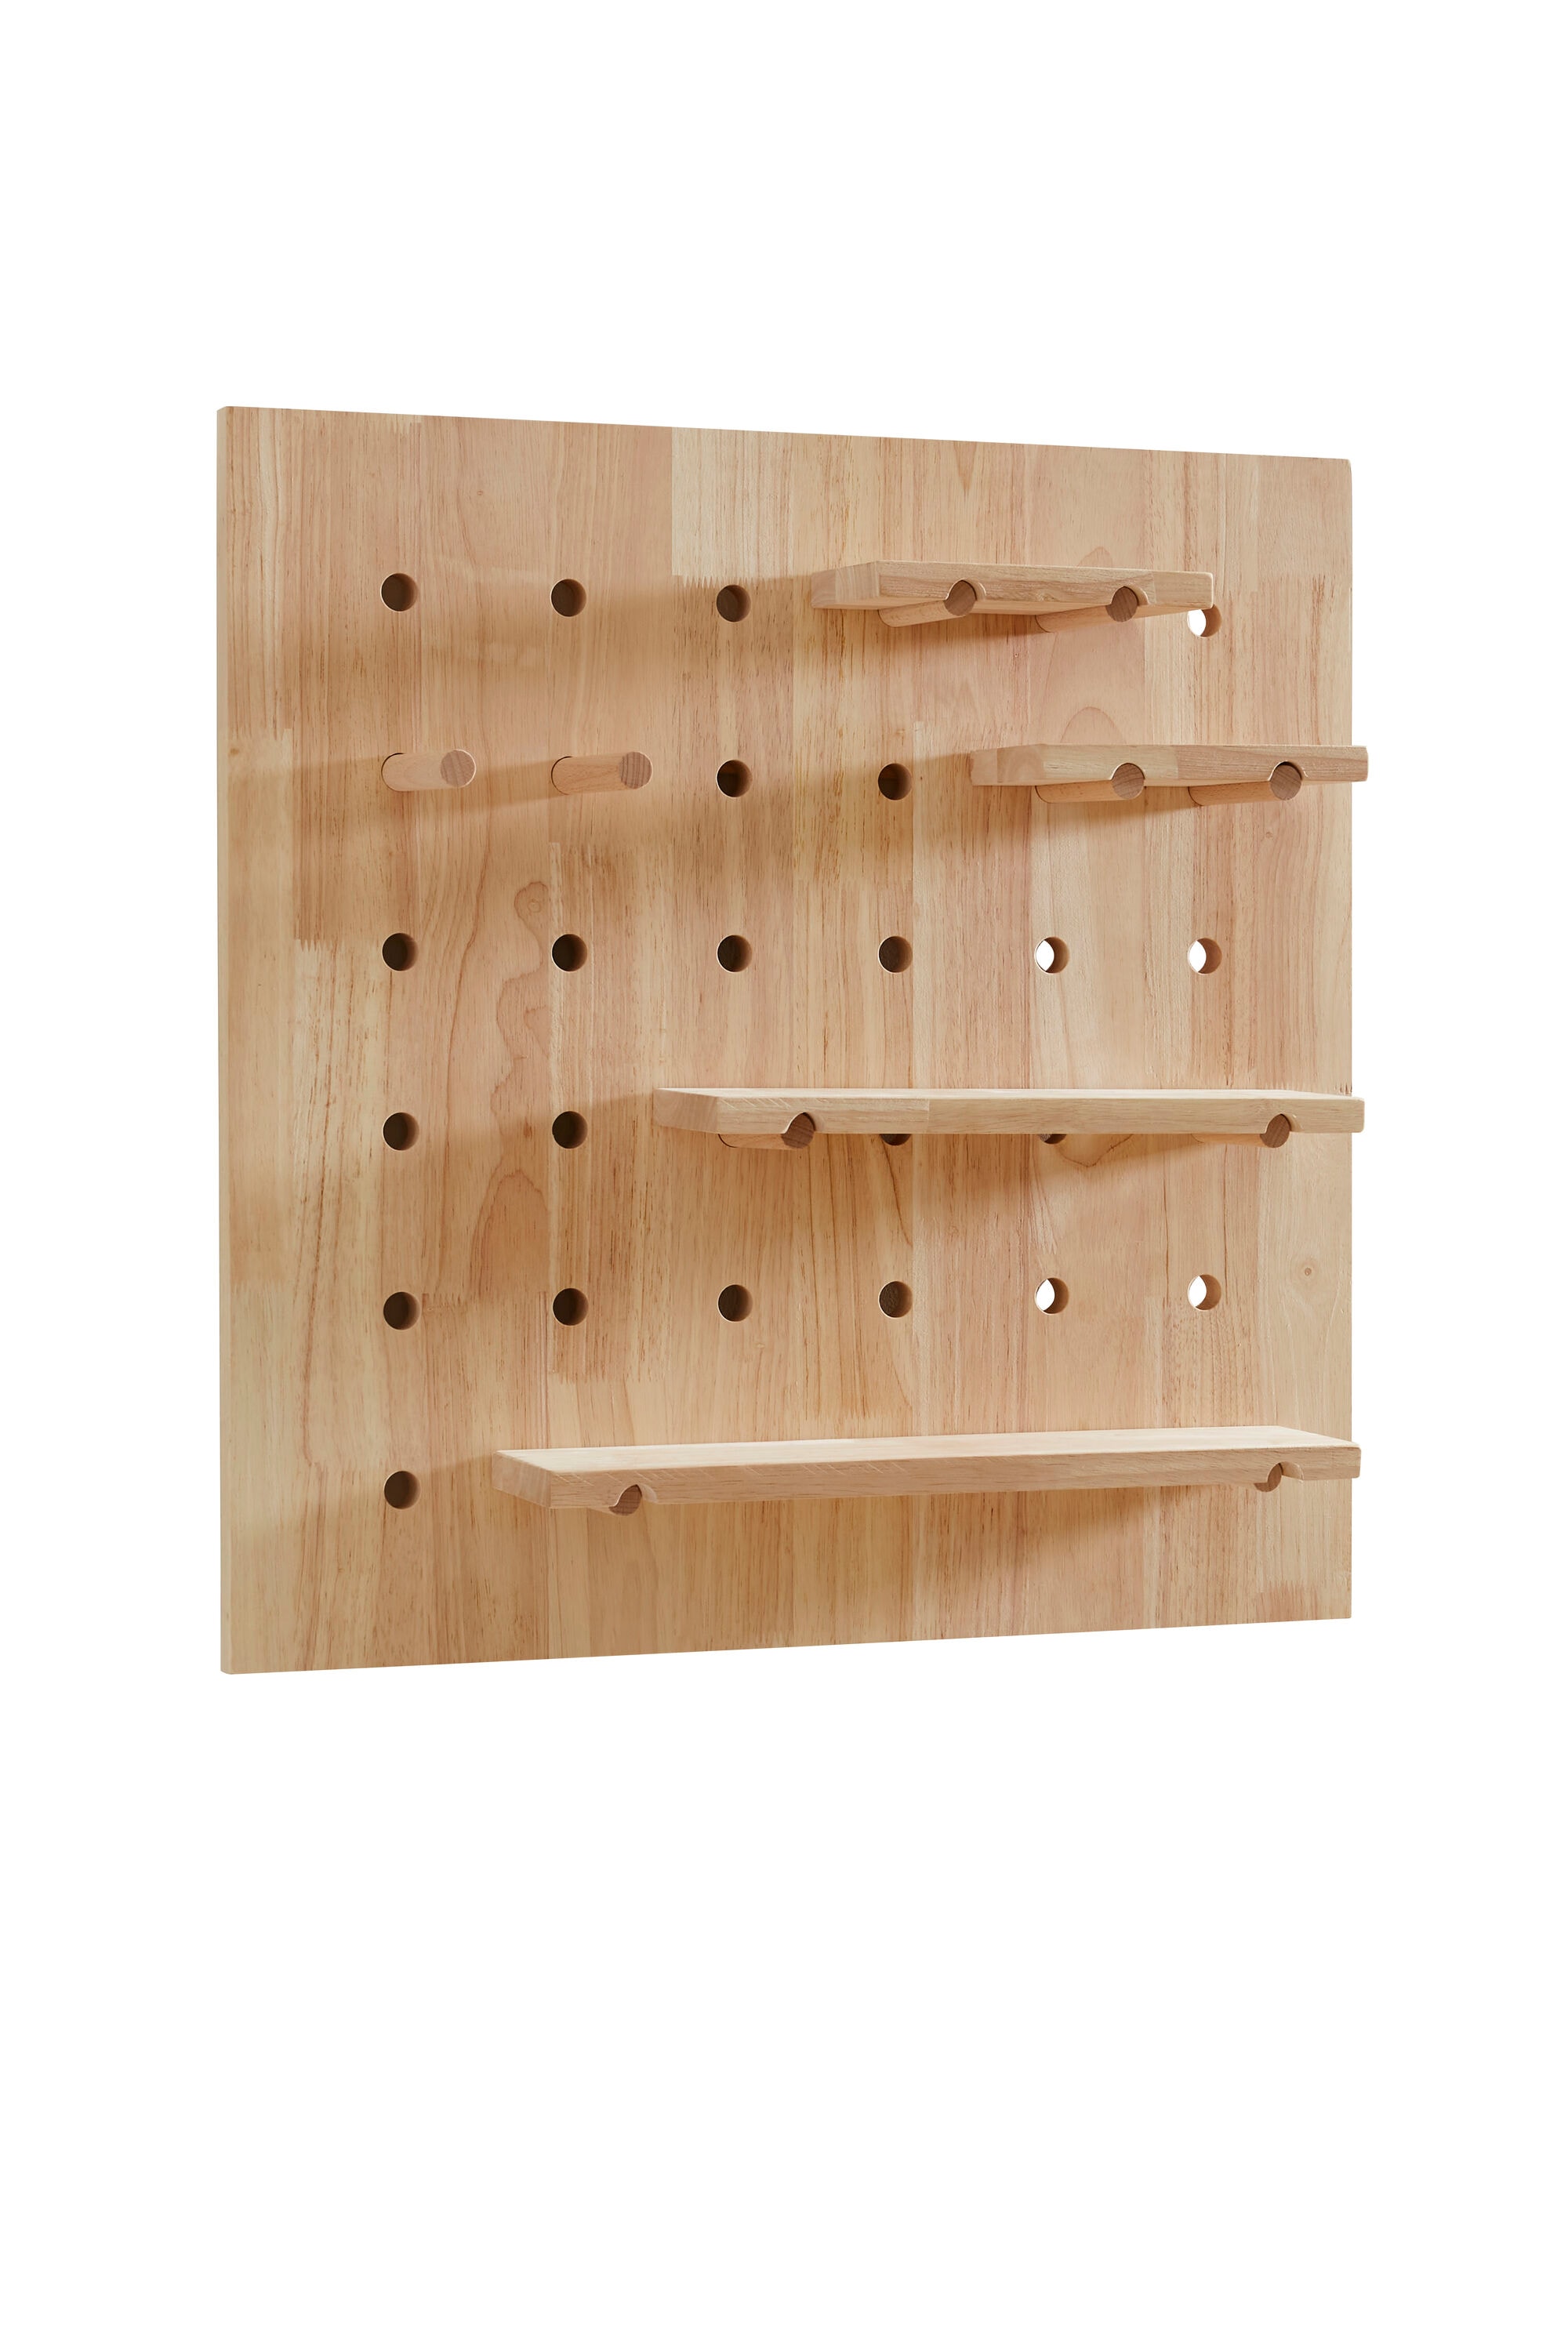 Style Selections Wooden Pegboard Set 17-Piece Wood Pegboard Kit in Brown  (24-in W x 24-in H)